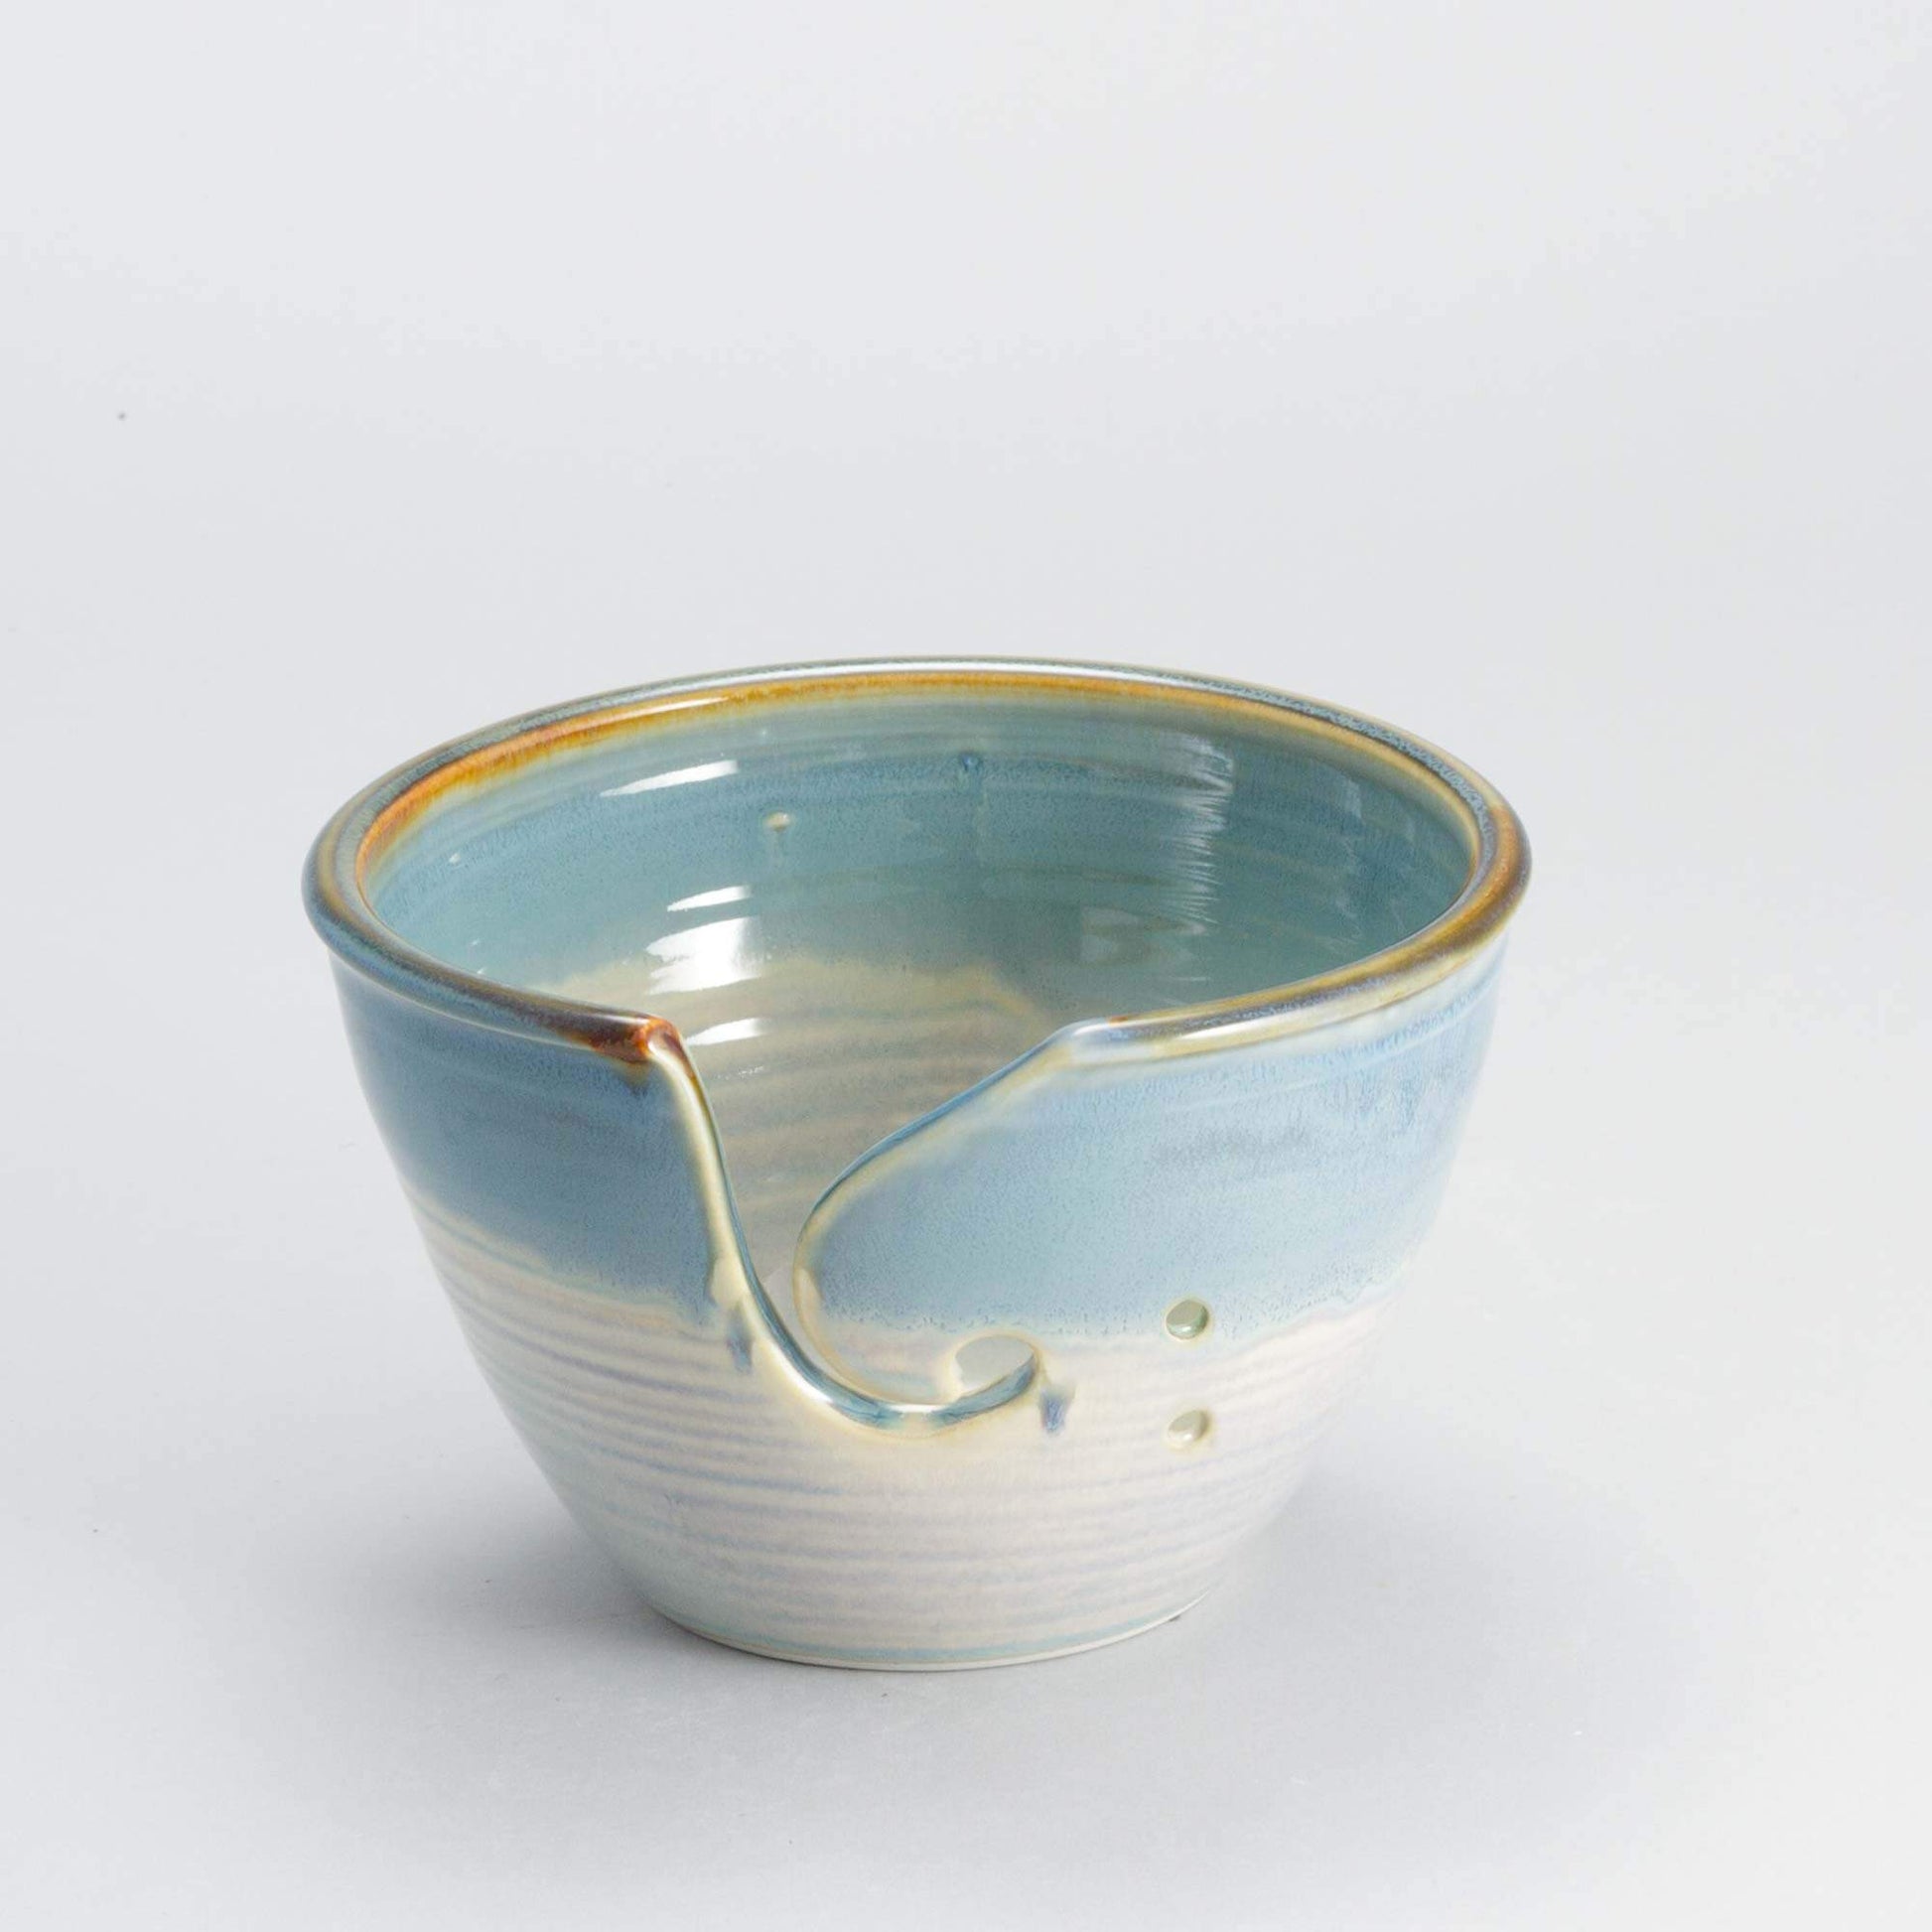 Handmade Pottery Knitting Bowl in Ivory & Blue pattern made by Georgetown Pottery in Maine